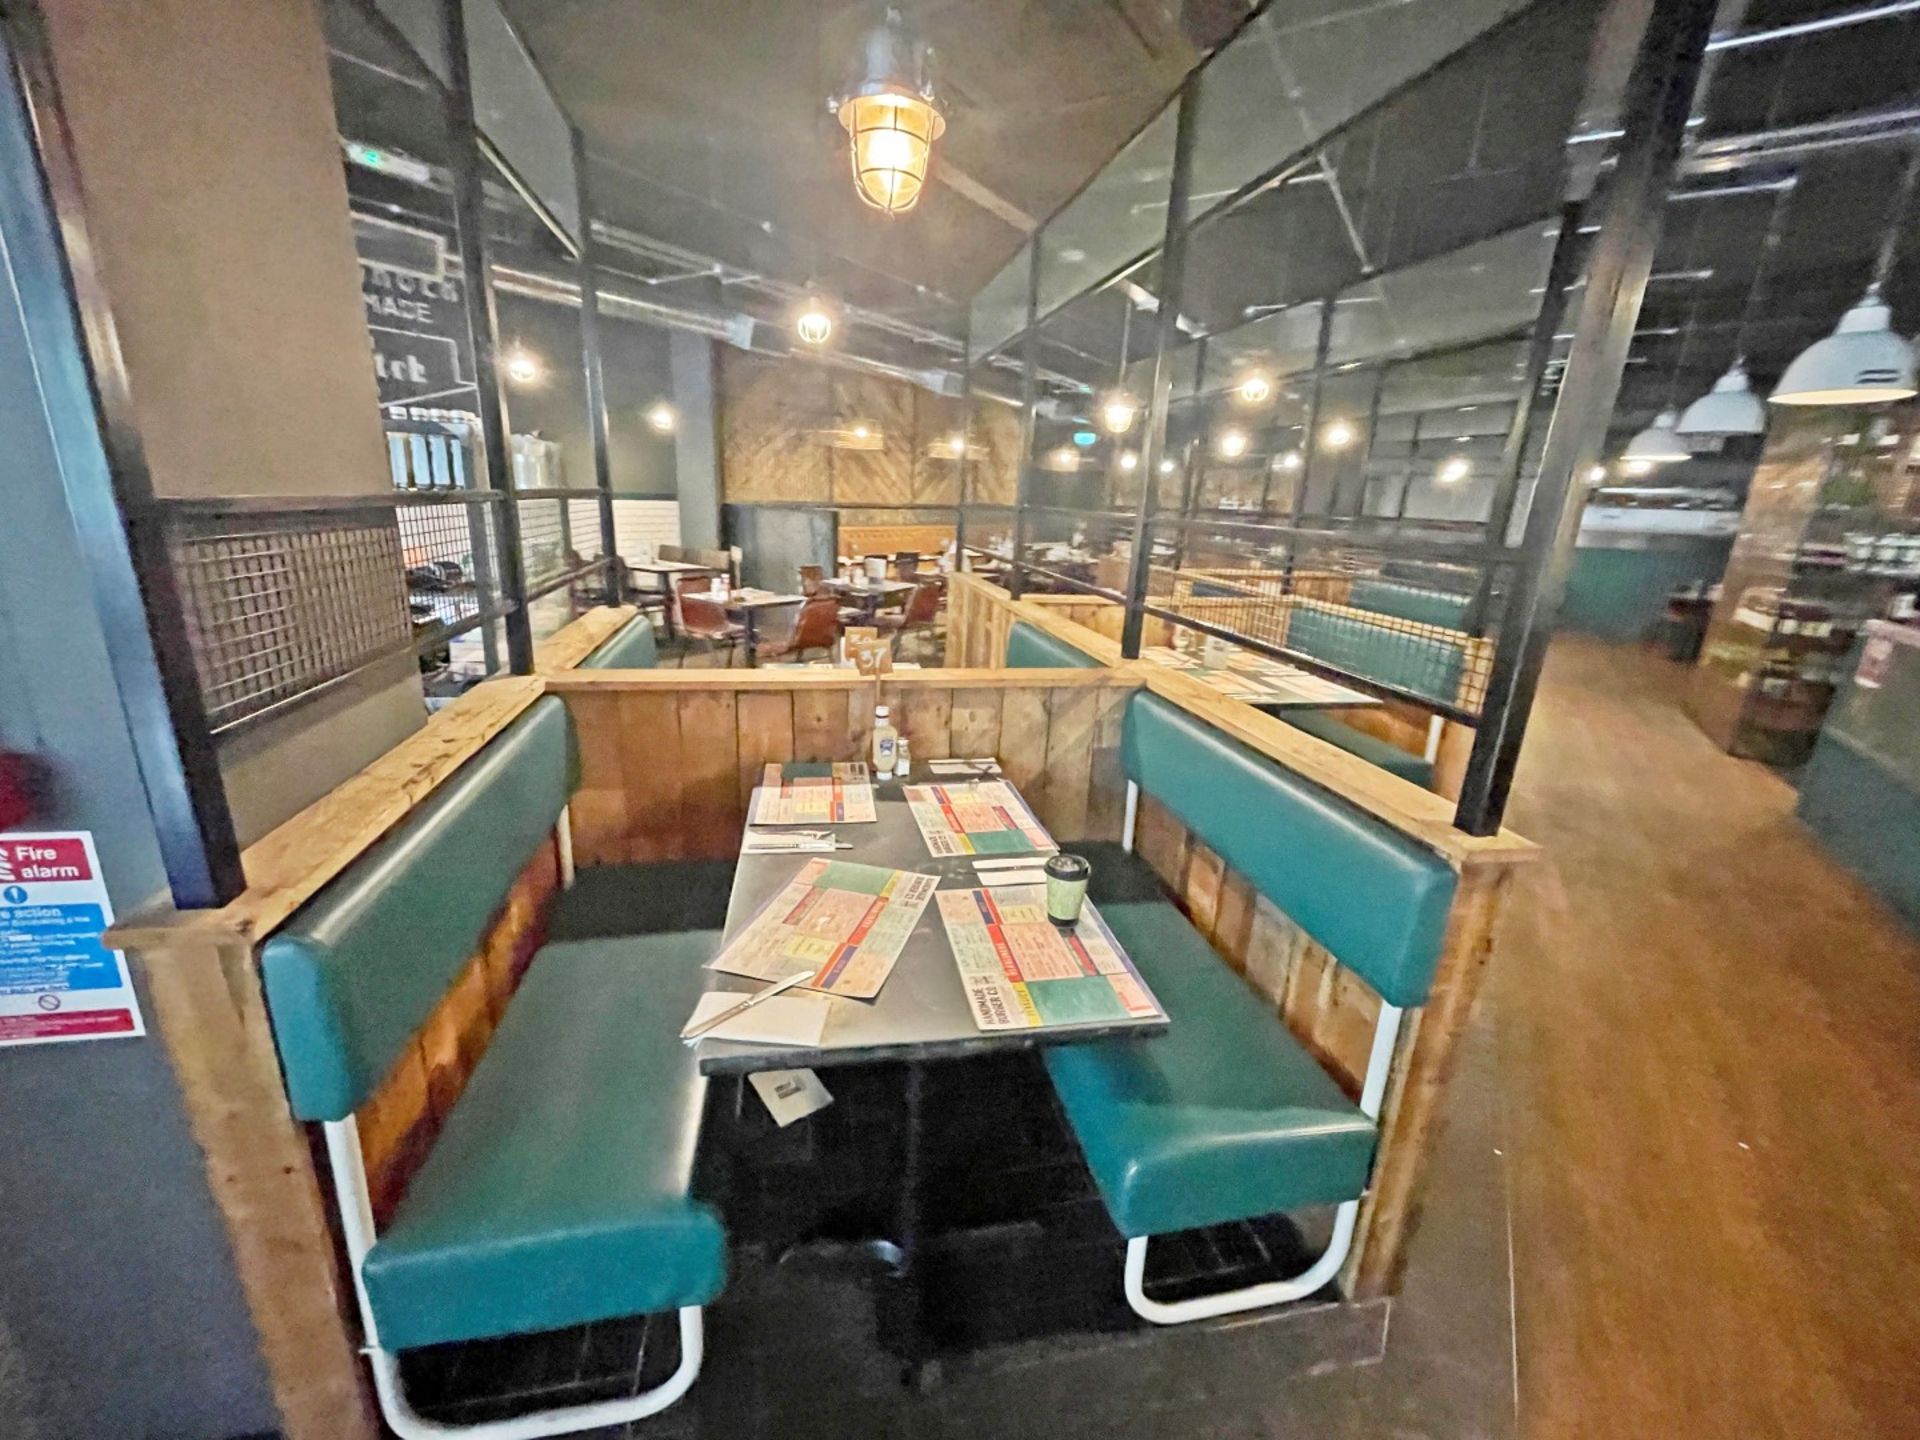 Large Seating Booth Area Featuring Rustic Wood Dividers Under Industrial Style Height Extenders - Image 24 of 27